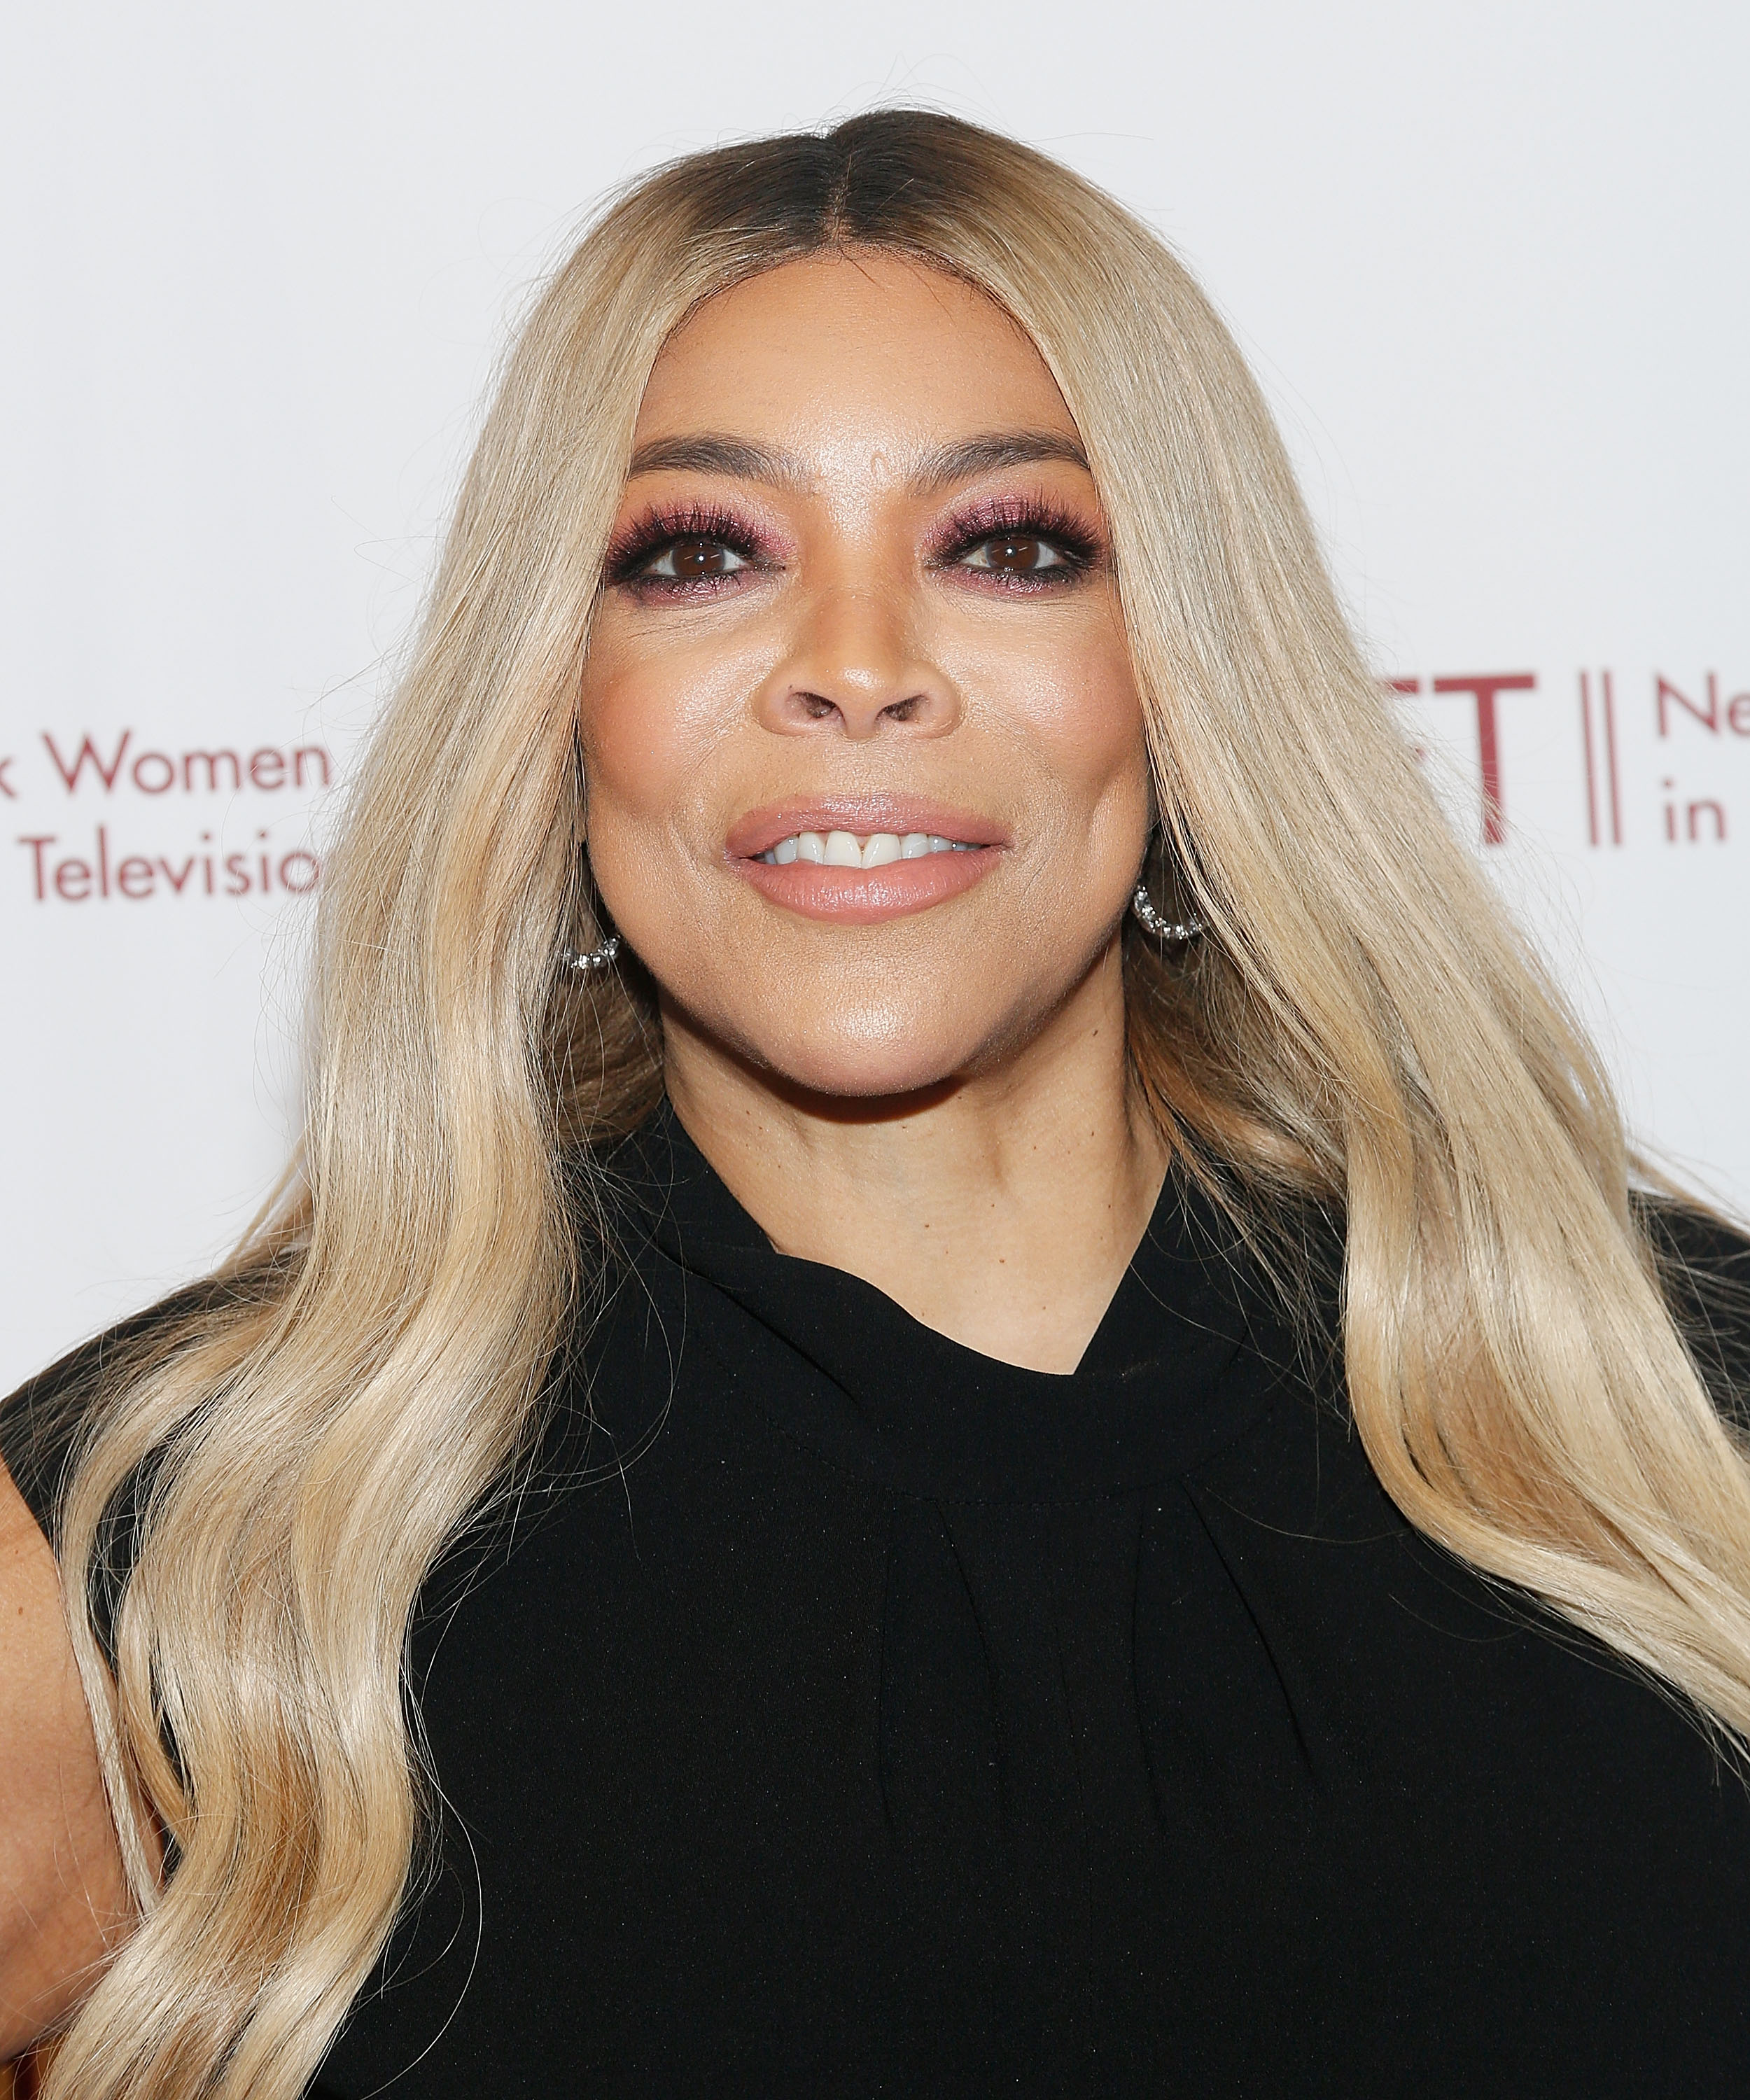 Wendy Williams attends the NYWIFT Muse Awards in New York City, on December 10, 2019. | Source: Getty Images